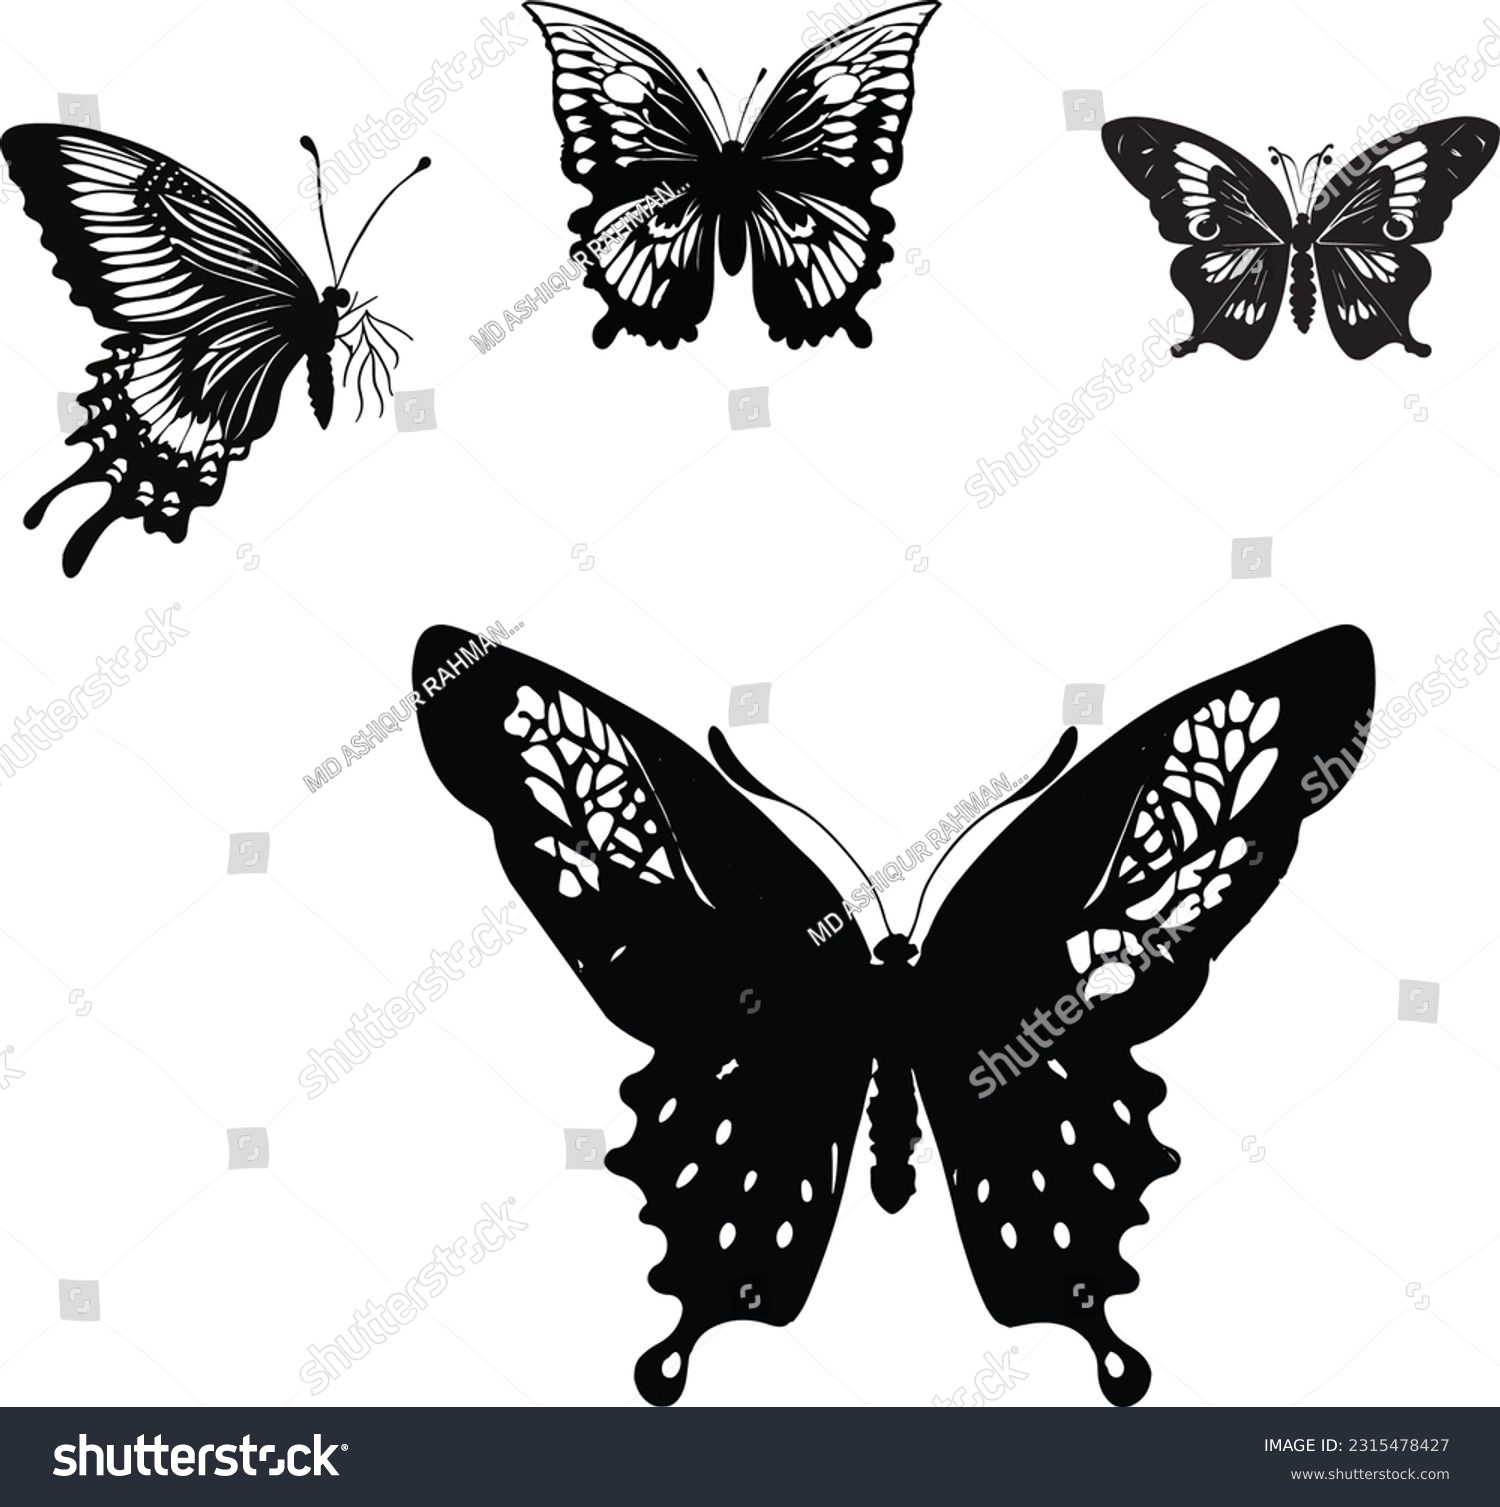 SVG of Butterfly Svg, Butterfly Silhouette,vector file.eps.This is a creative art.It  is also printable file. svg